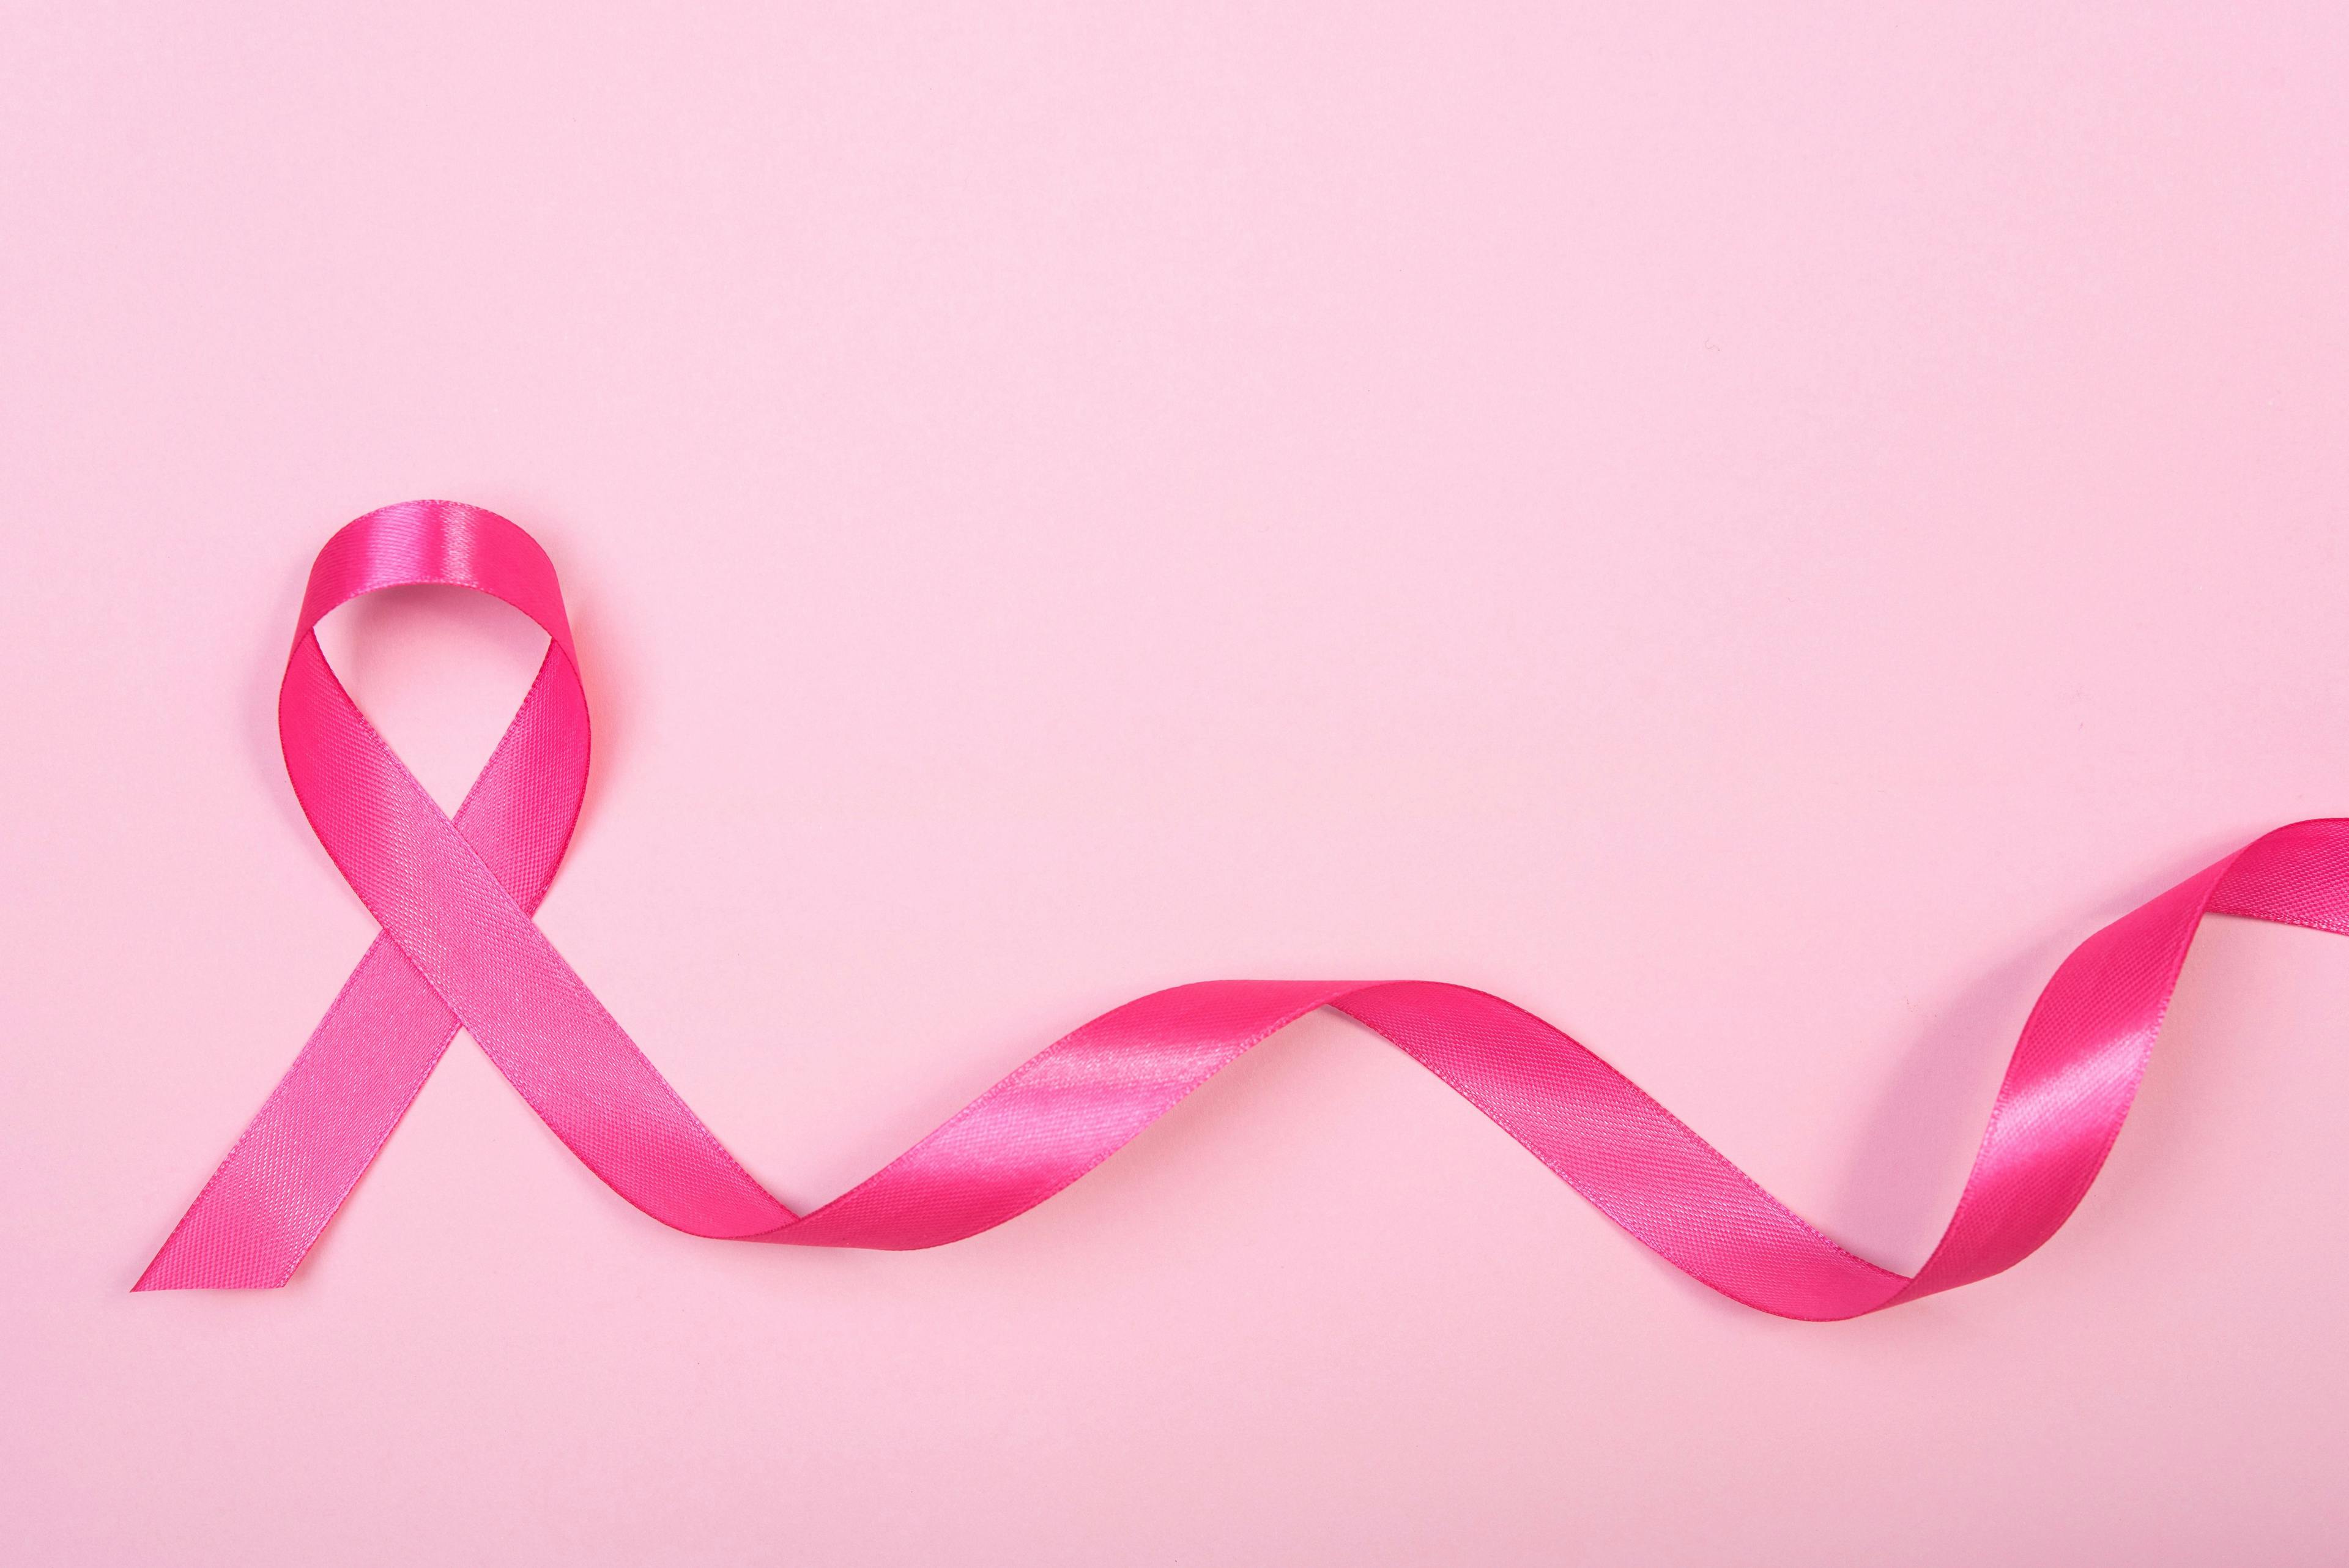 Exogenous hormones and patients at increased risk for breast cancer: © NaMong Productions - stock.adobe.com